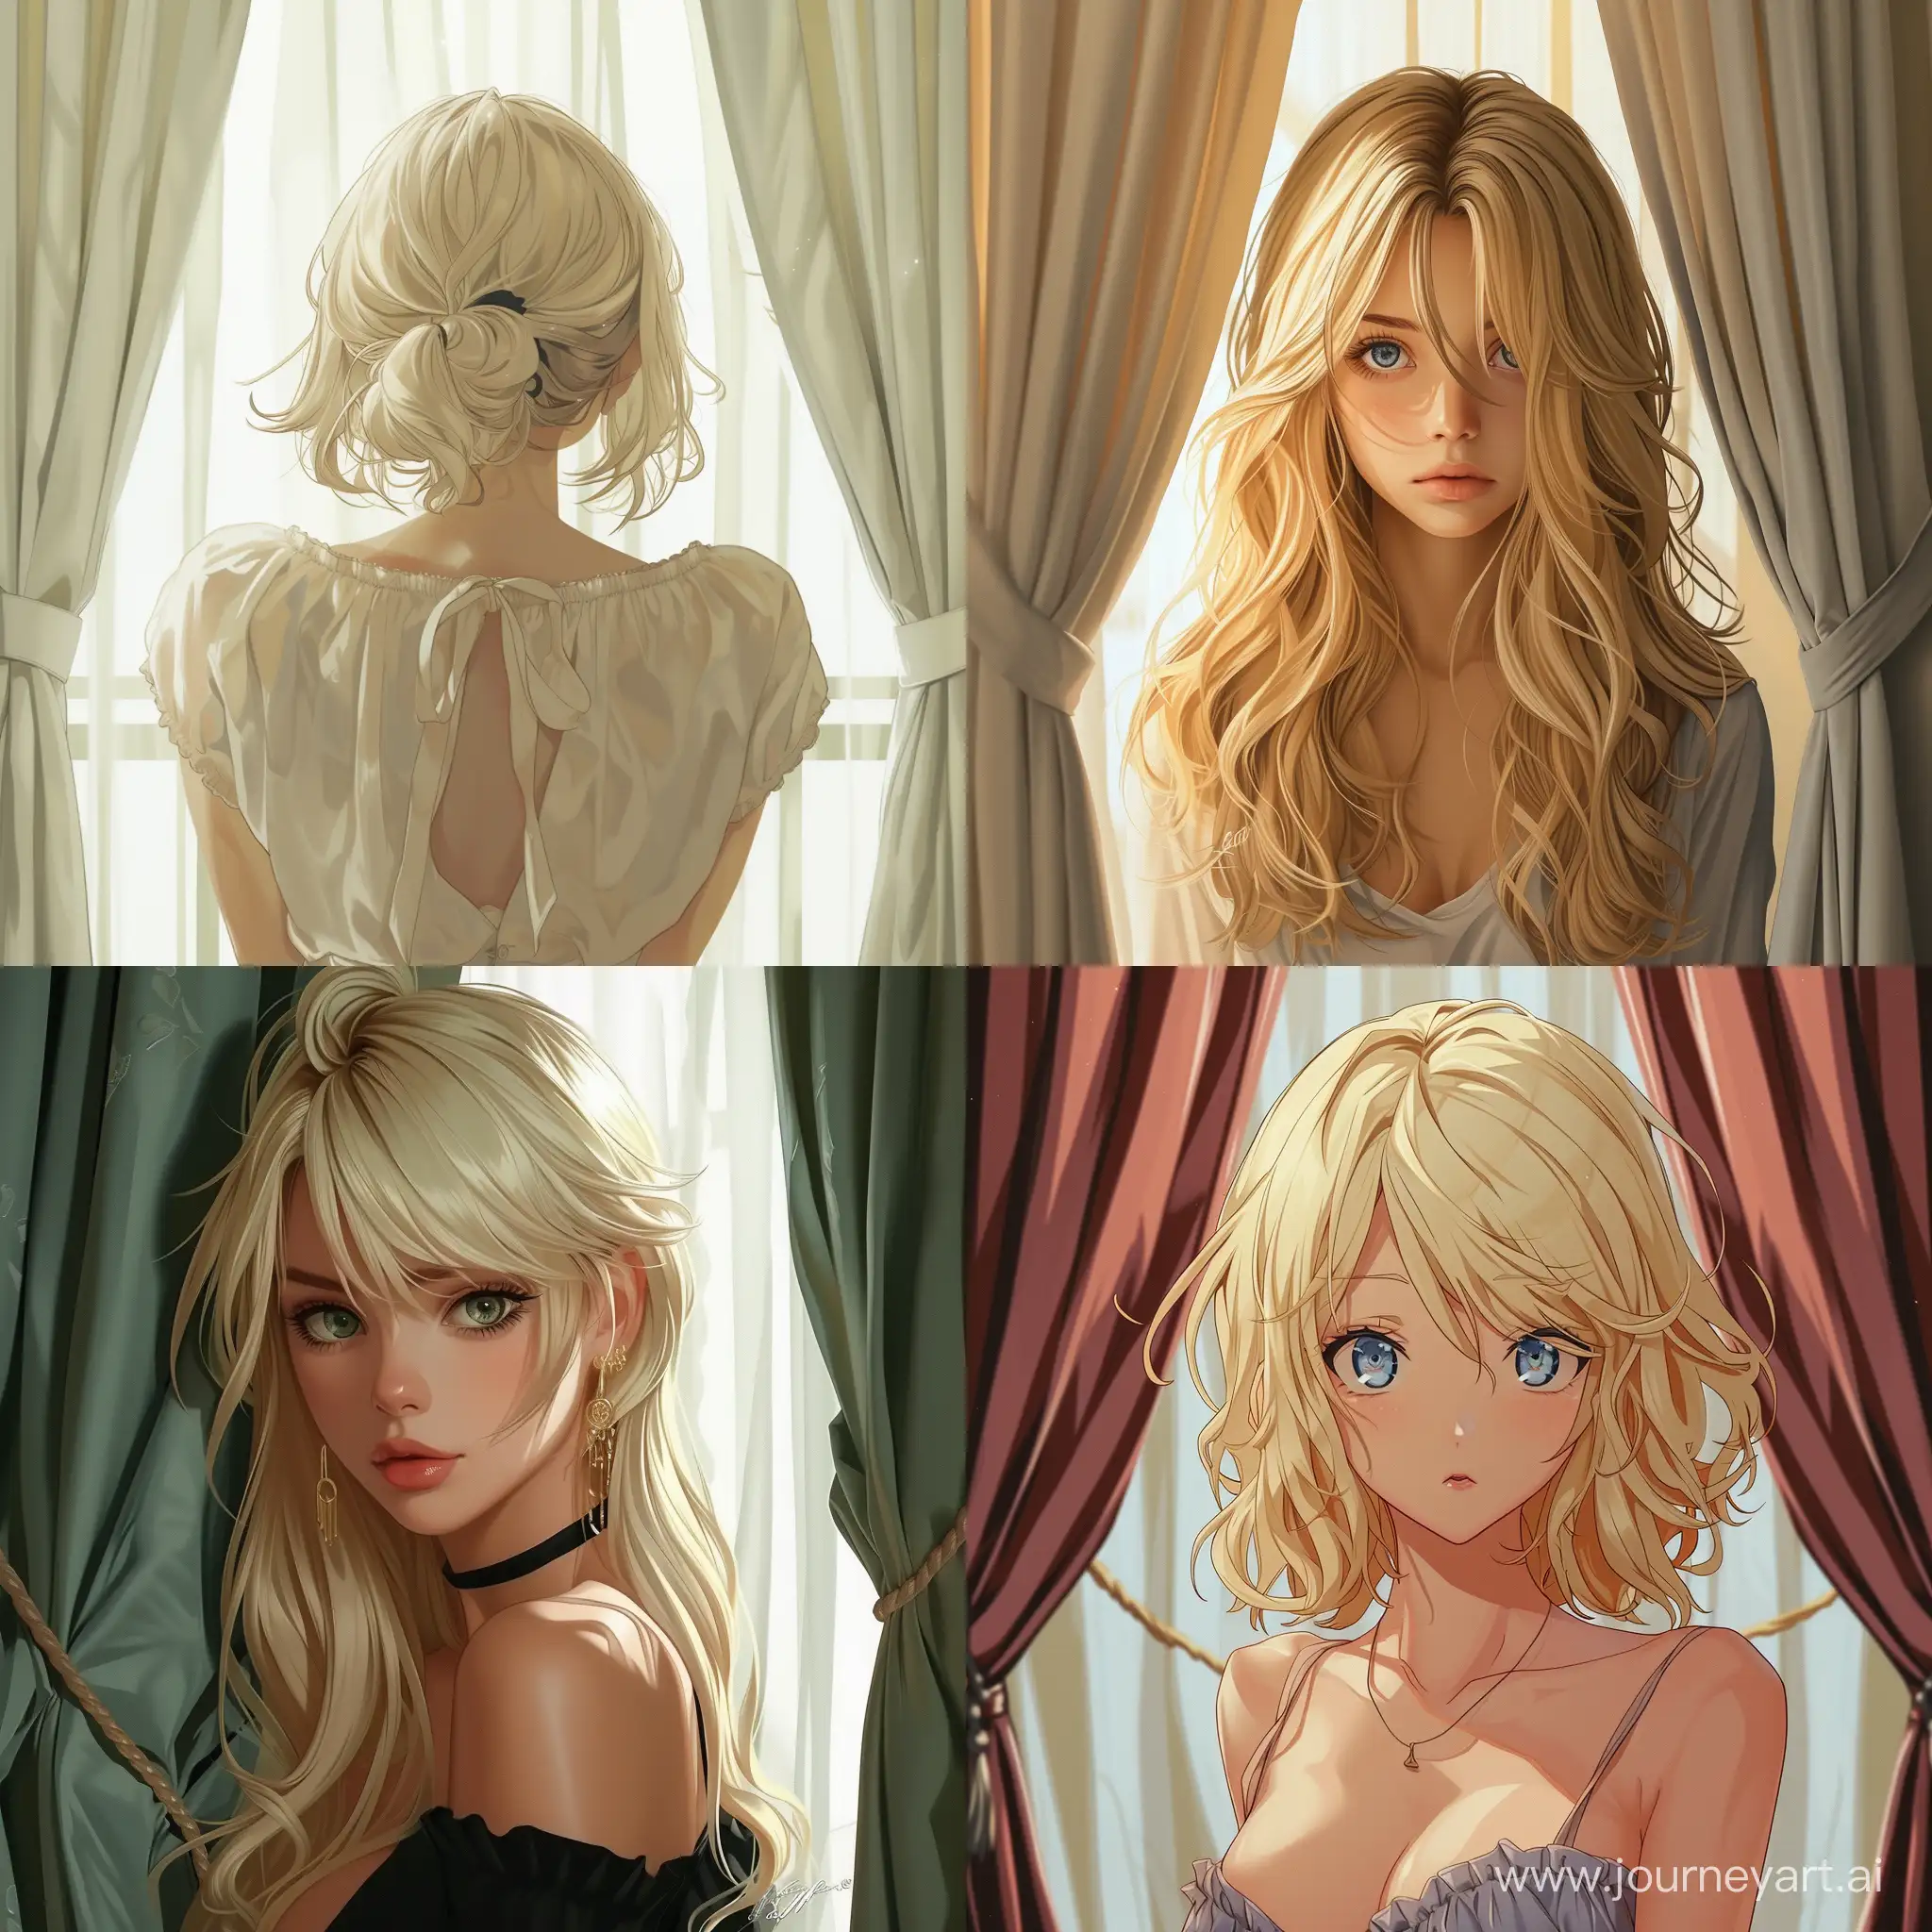 Anime-Avatar-with-Elegant-Blond-Hair-and-Stylish-Curtains-Background